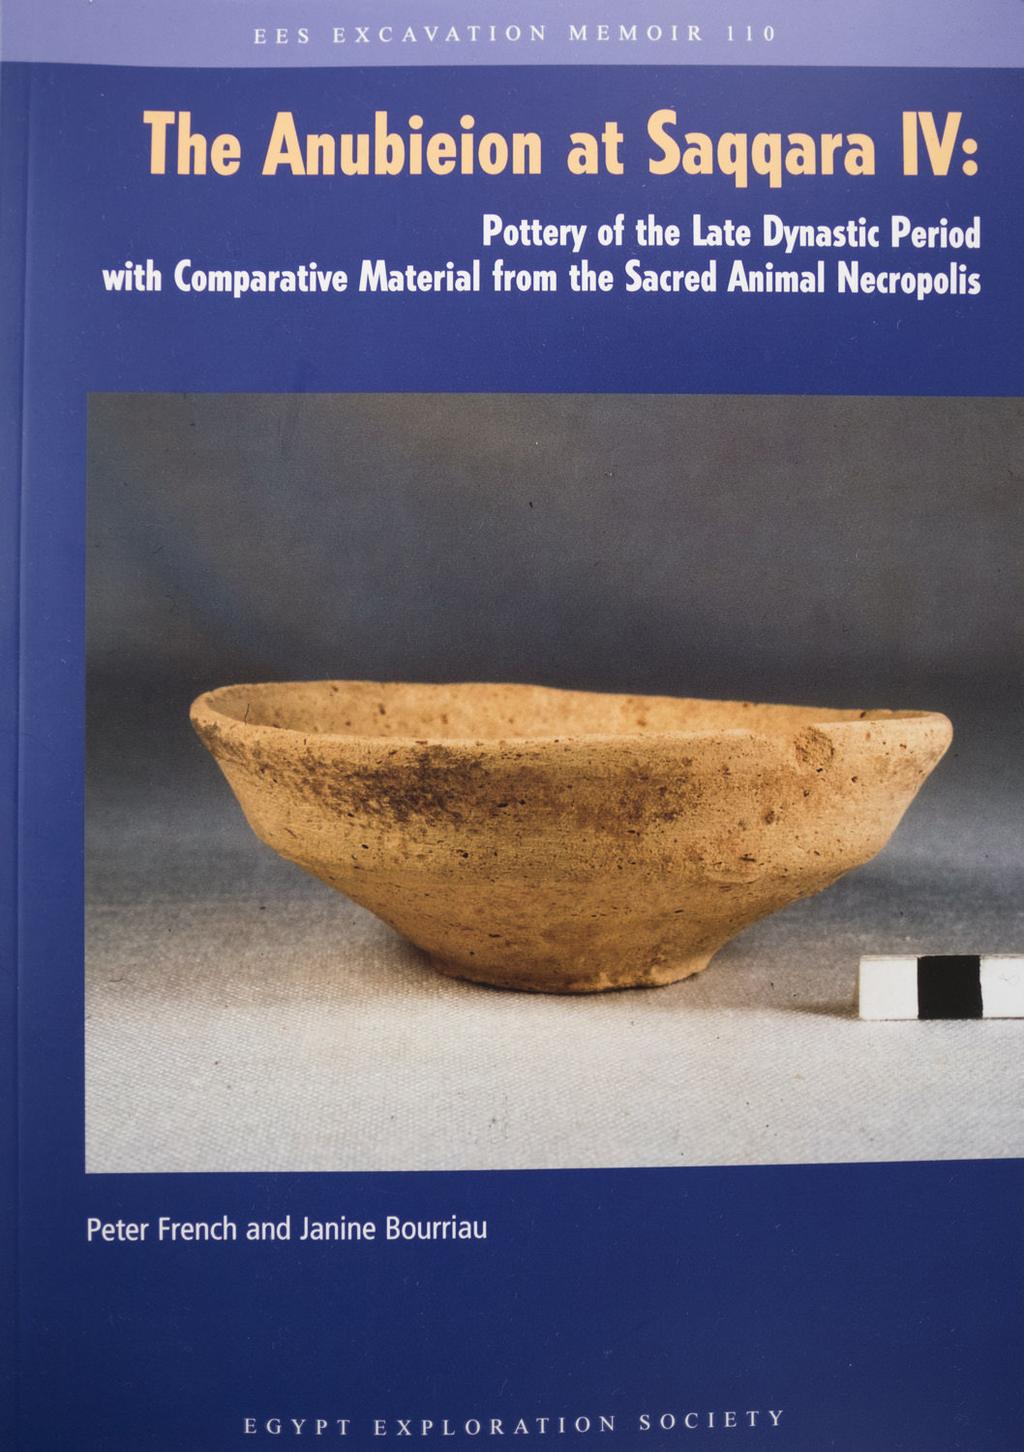 The Anubieion at Saqqara IV: Pottery of the Late Dynastic Period with Comparative Material from the Sacred Animal Necropolis Author: Peter French and Janine Bourriau Year of publication: 2018 Peter